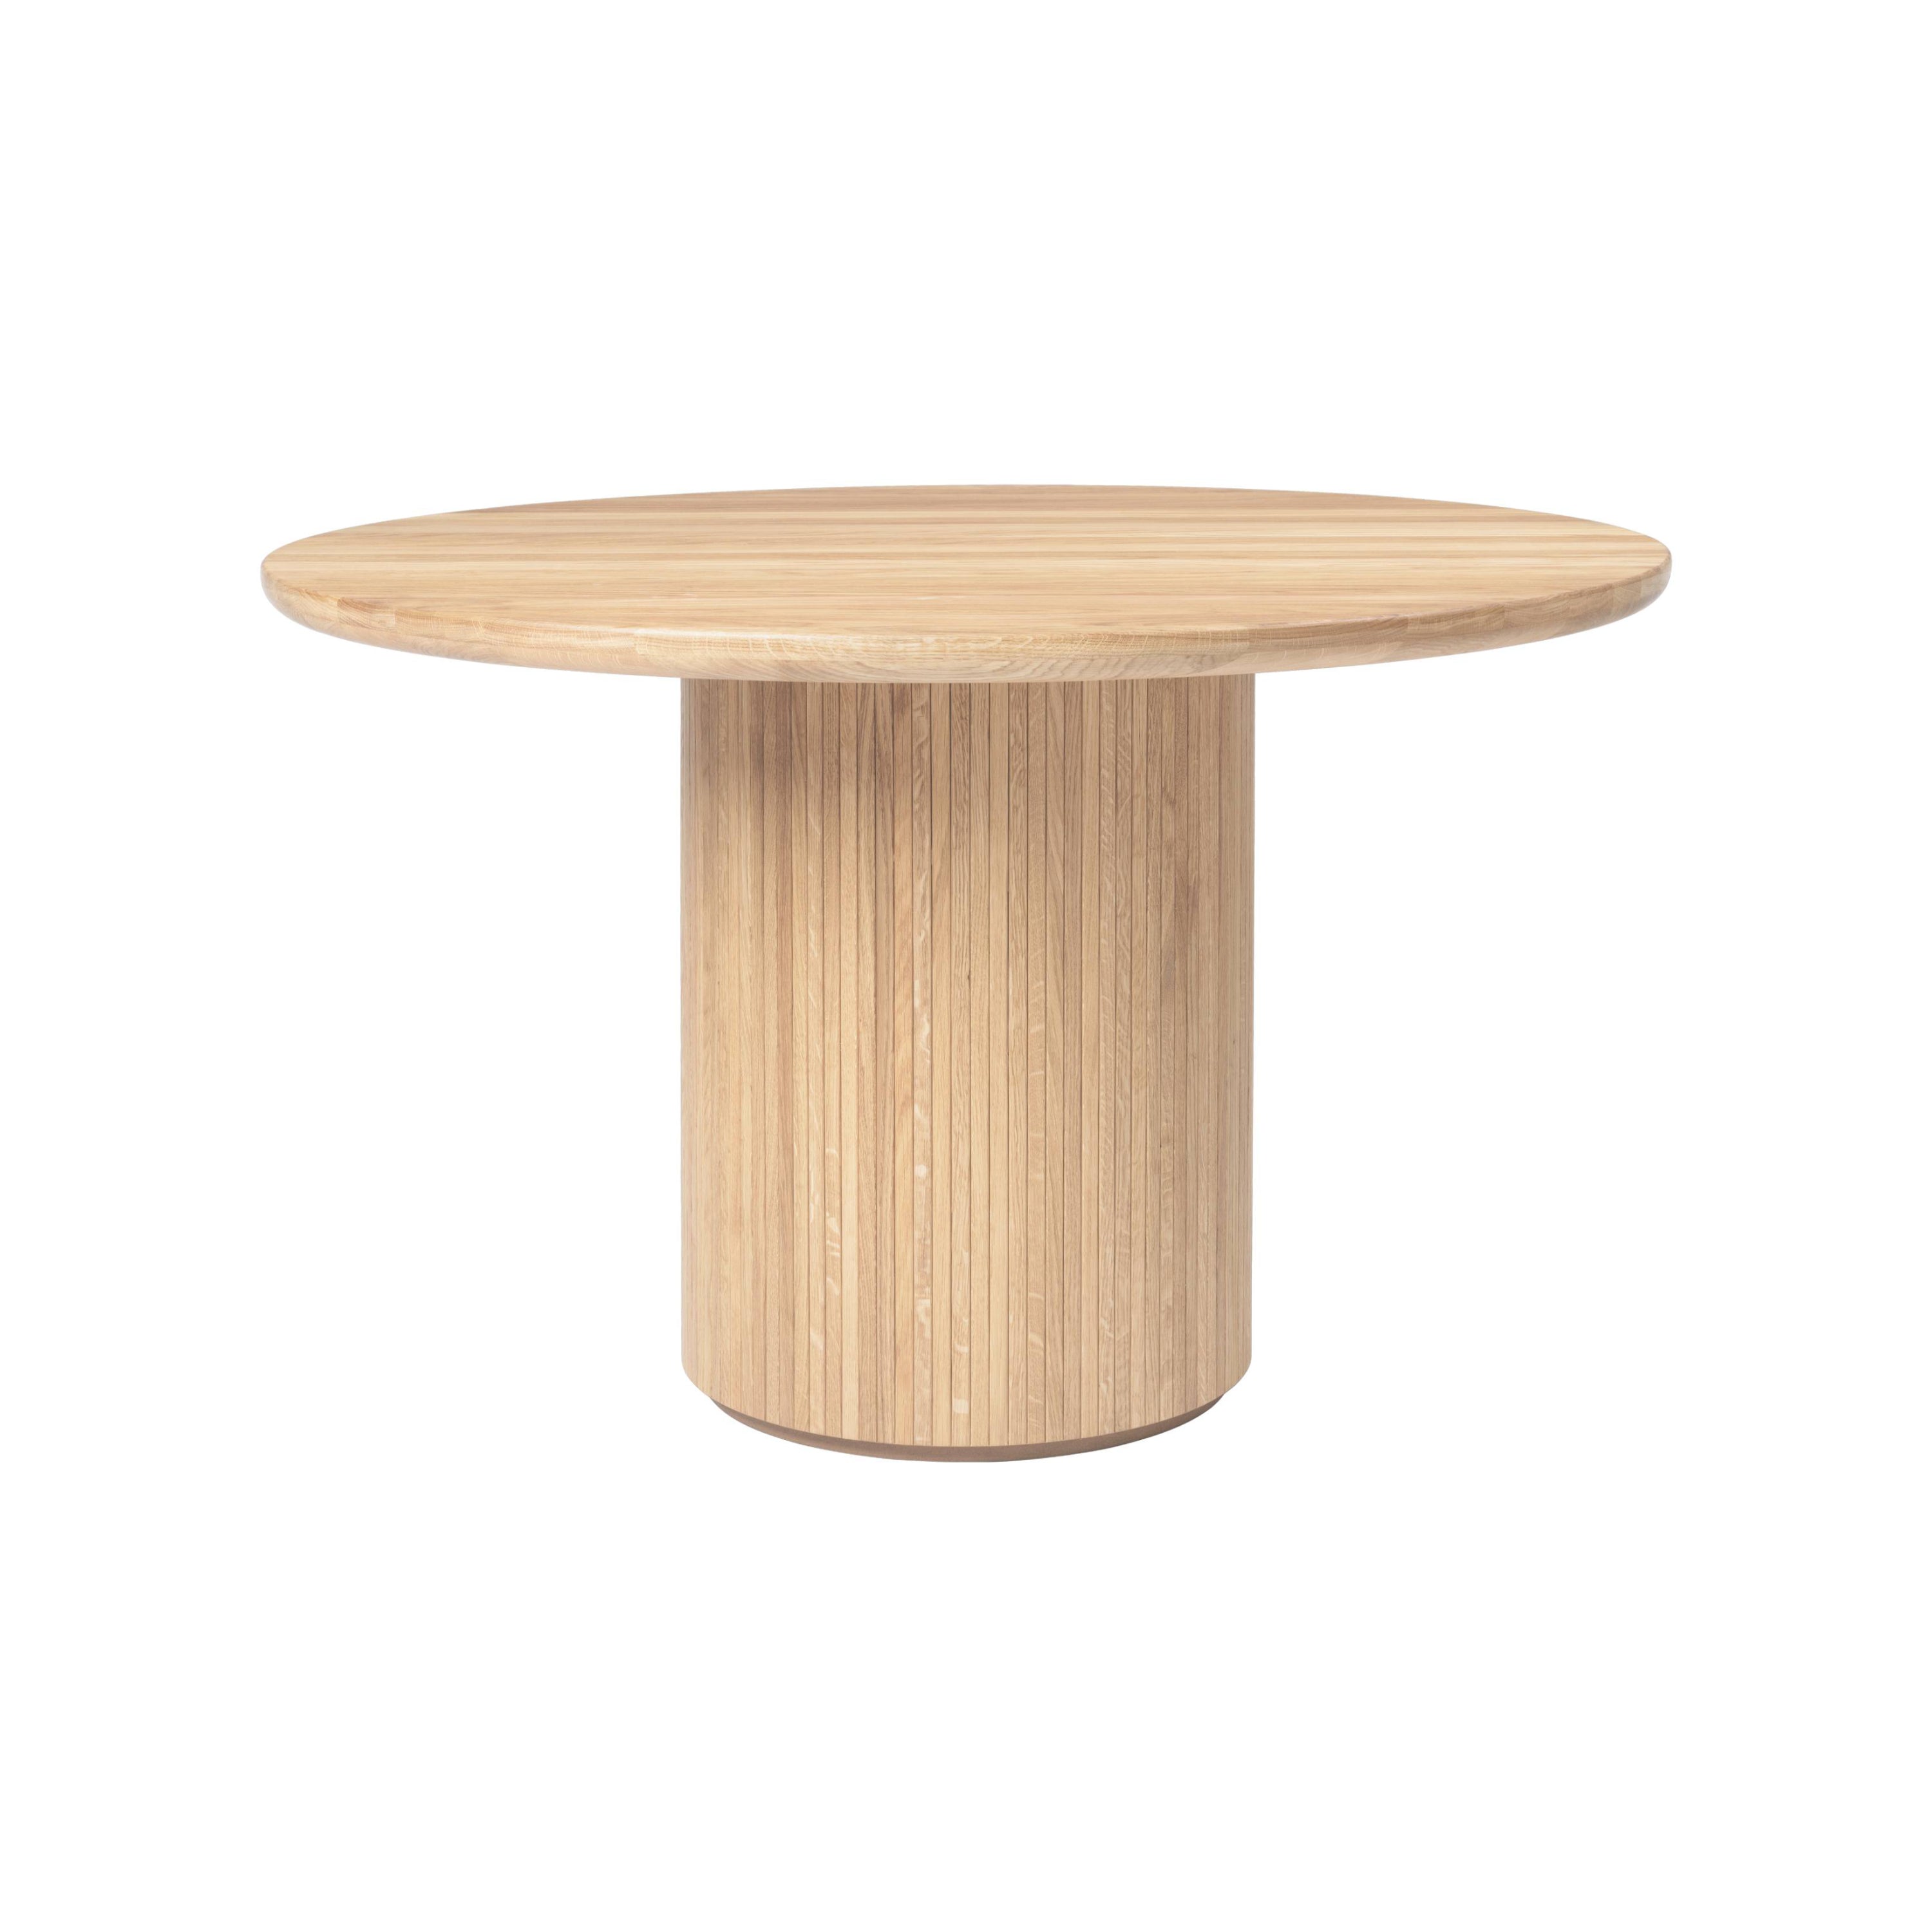 Moon Dining Table: Round + Small - 47.2